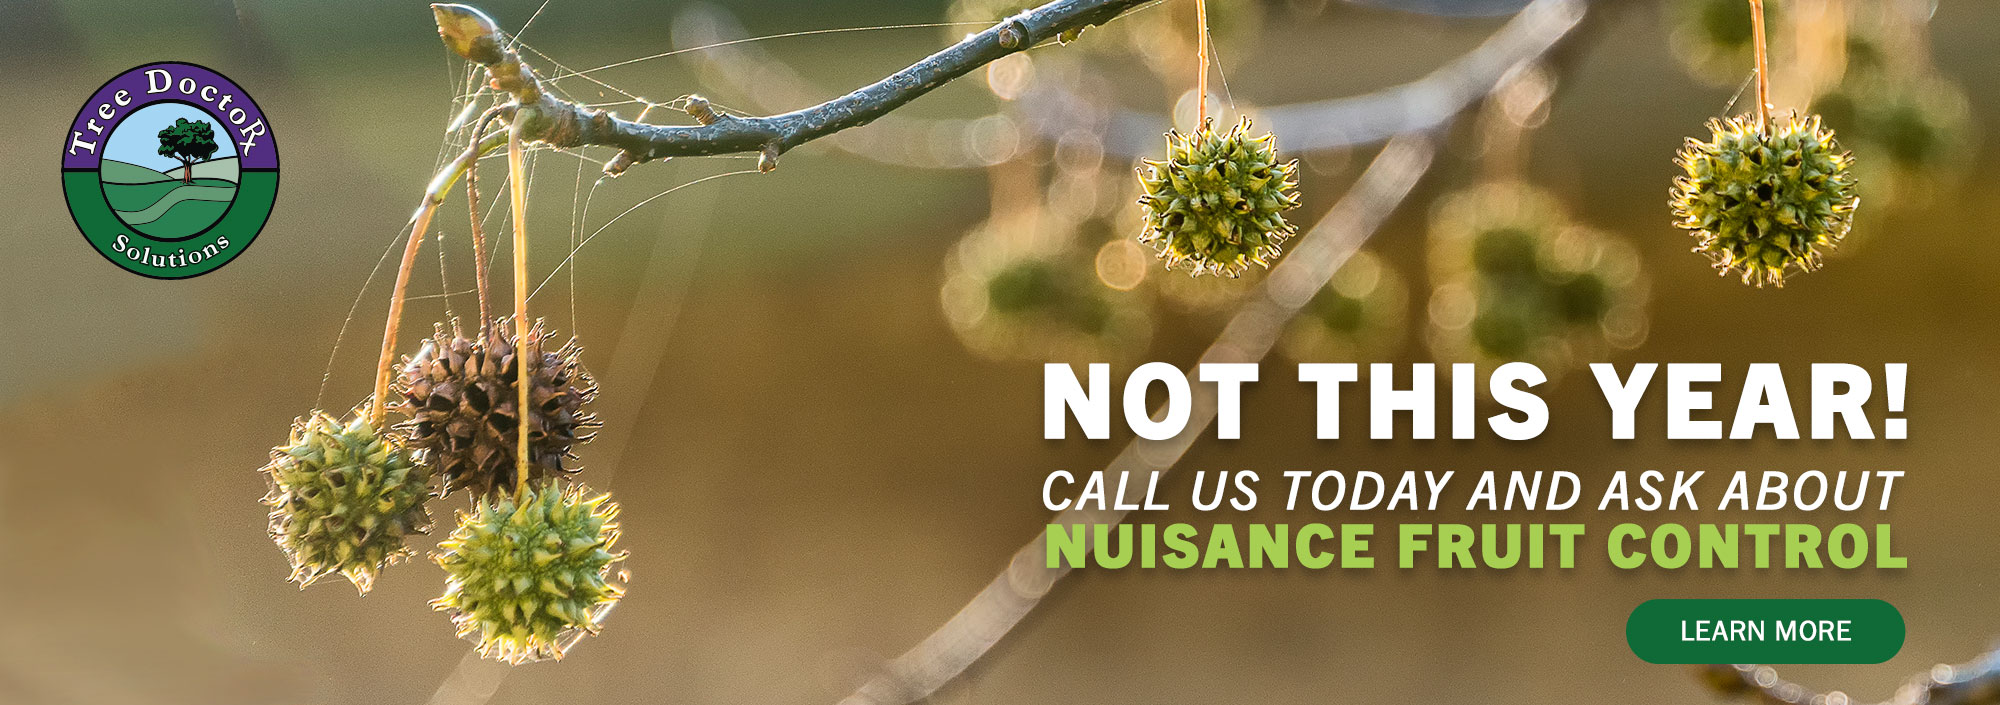 Not this year! Nuisance Fruit Control. 